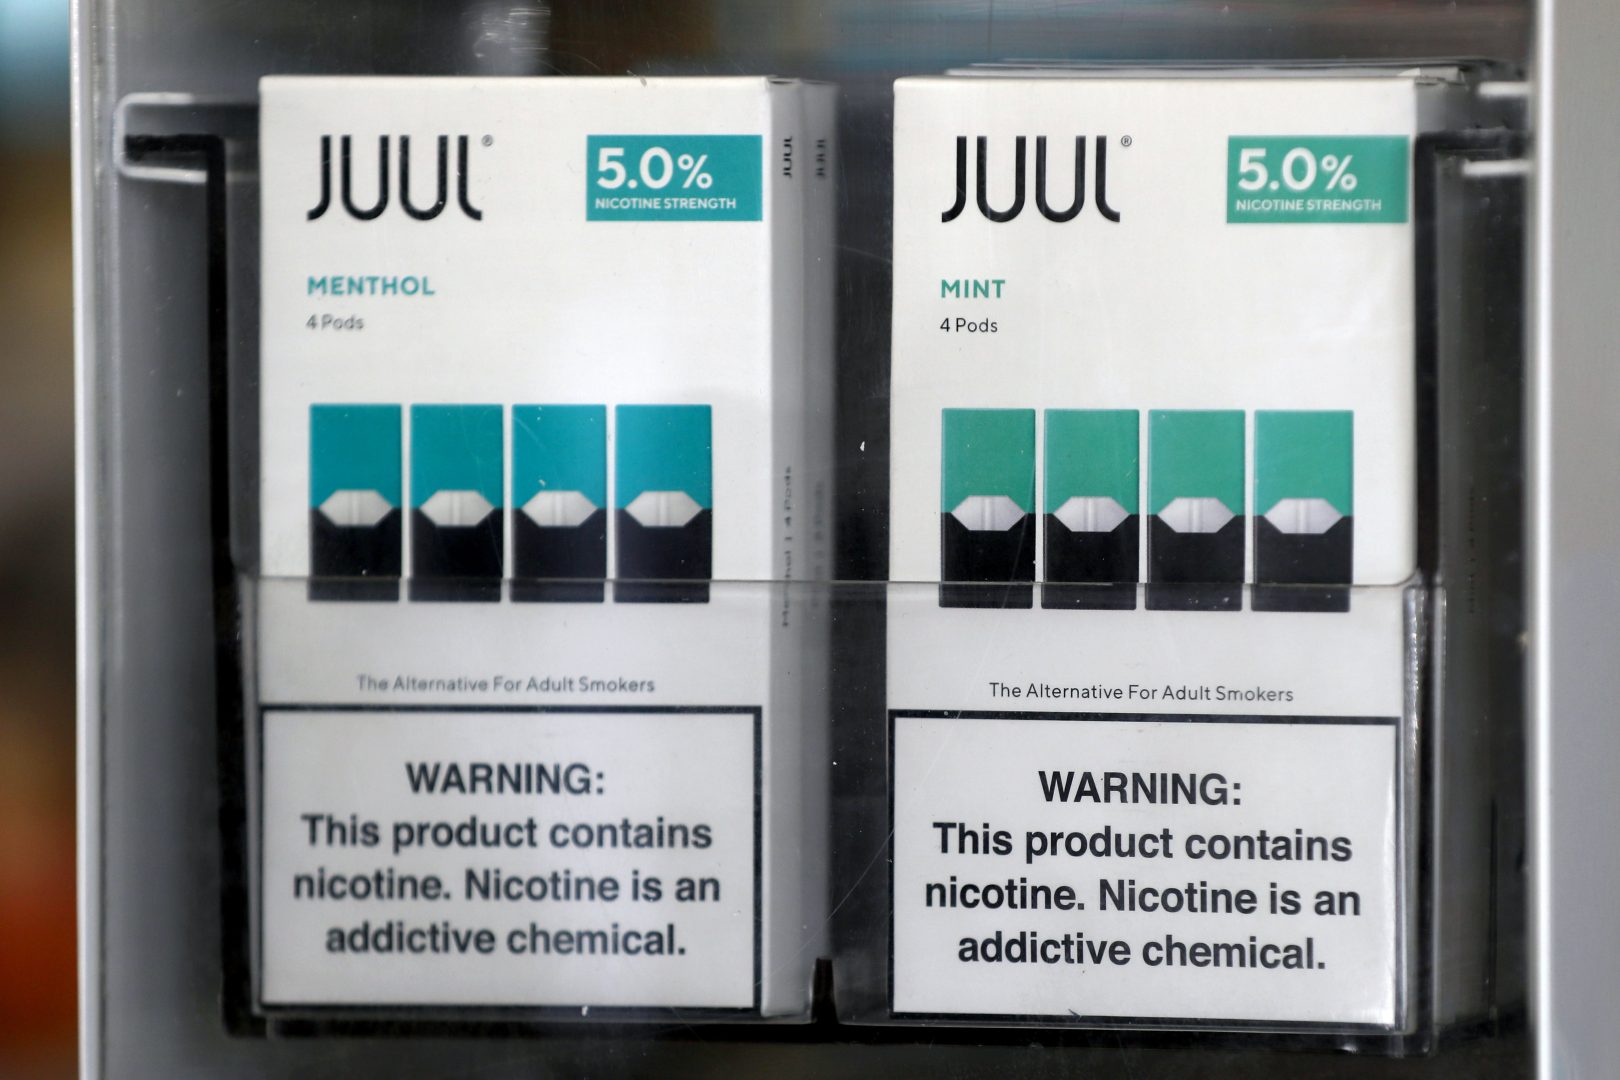 SAN RAFAEL, CALIFORNIA - NOVEMBER 07:  Packages of Juul mint flavored e-cigarettes are displayed at San Rafael Smokeshop on November 07, 2019 in San Rafael, California. Juul, a leading e-cigarette company, announced that it is halting sales of their popular mint flavor e-cigarette after the release of two studies that showed a surge in teen use. 